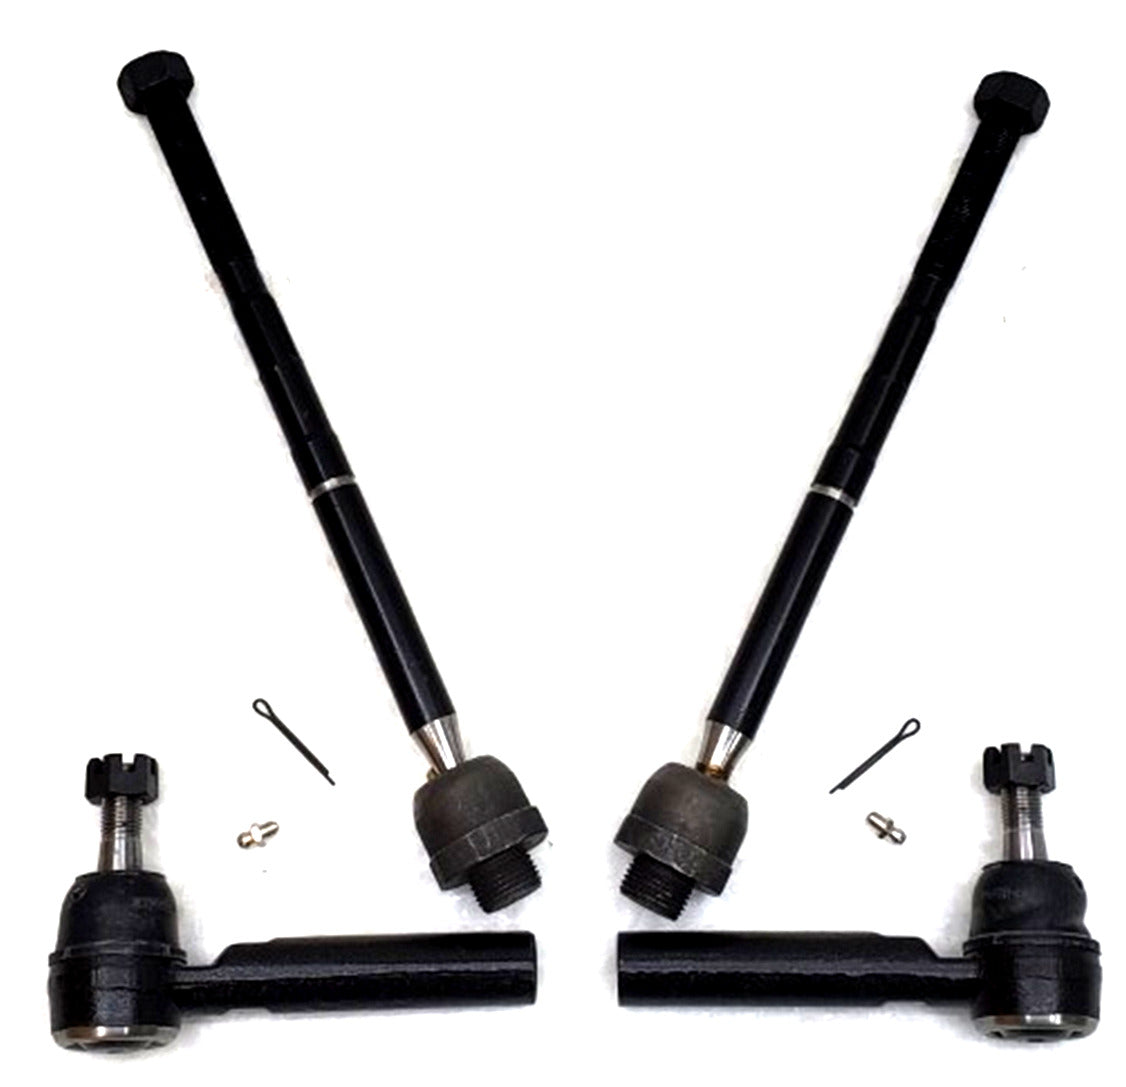 HD Inner & Outer Tie Rod Ends Steering Kit for 2007-2013 Chevrolet, GMC, Cadillac 2WD, 4x4